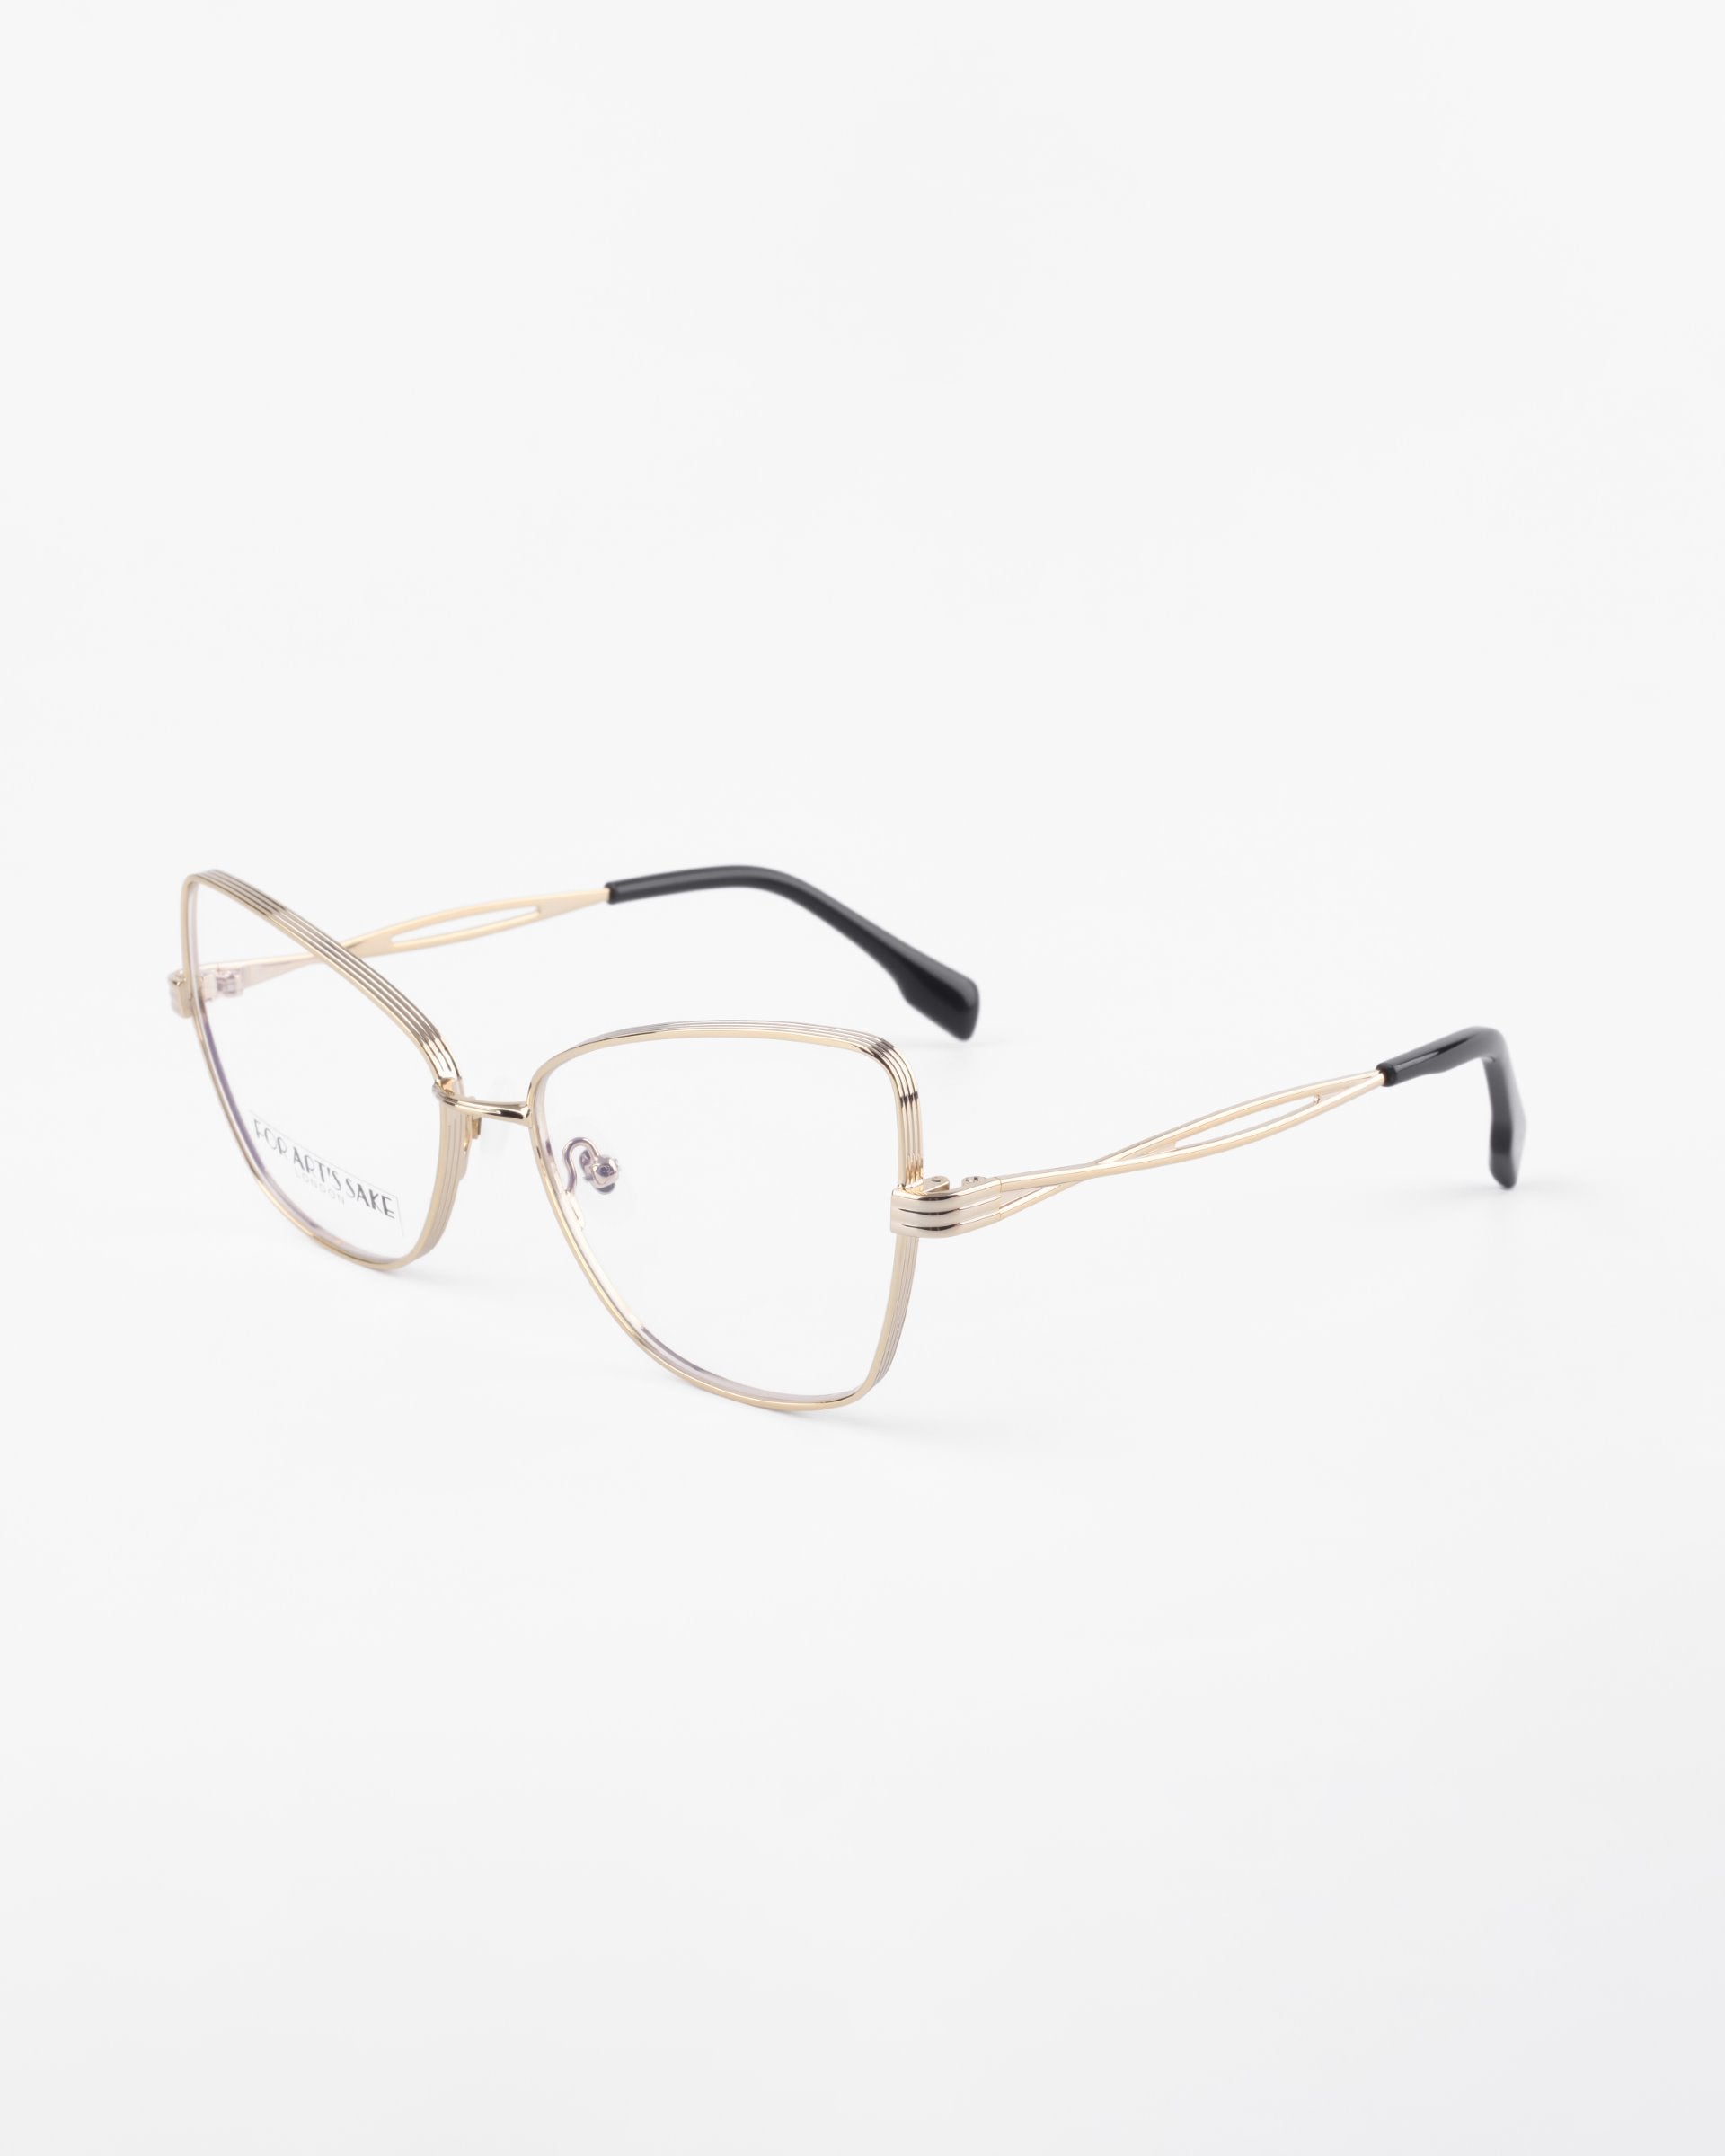 A pair of For Art's Sake® Lady eyeglasses with gold wire frames and a cat-eye silhouette. The temples feature a delicate, openwork design and have black plastic tips for comfort. These stylish glasses can be fitted with prescription lenses or an optional blue light filter. The background is a plain white surface.